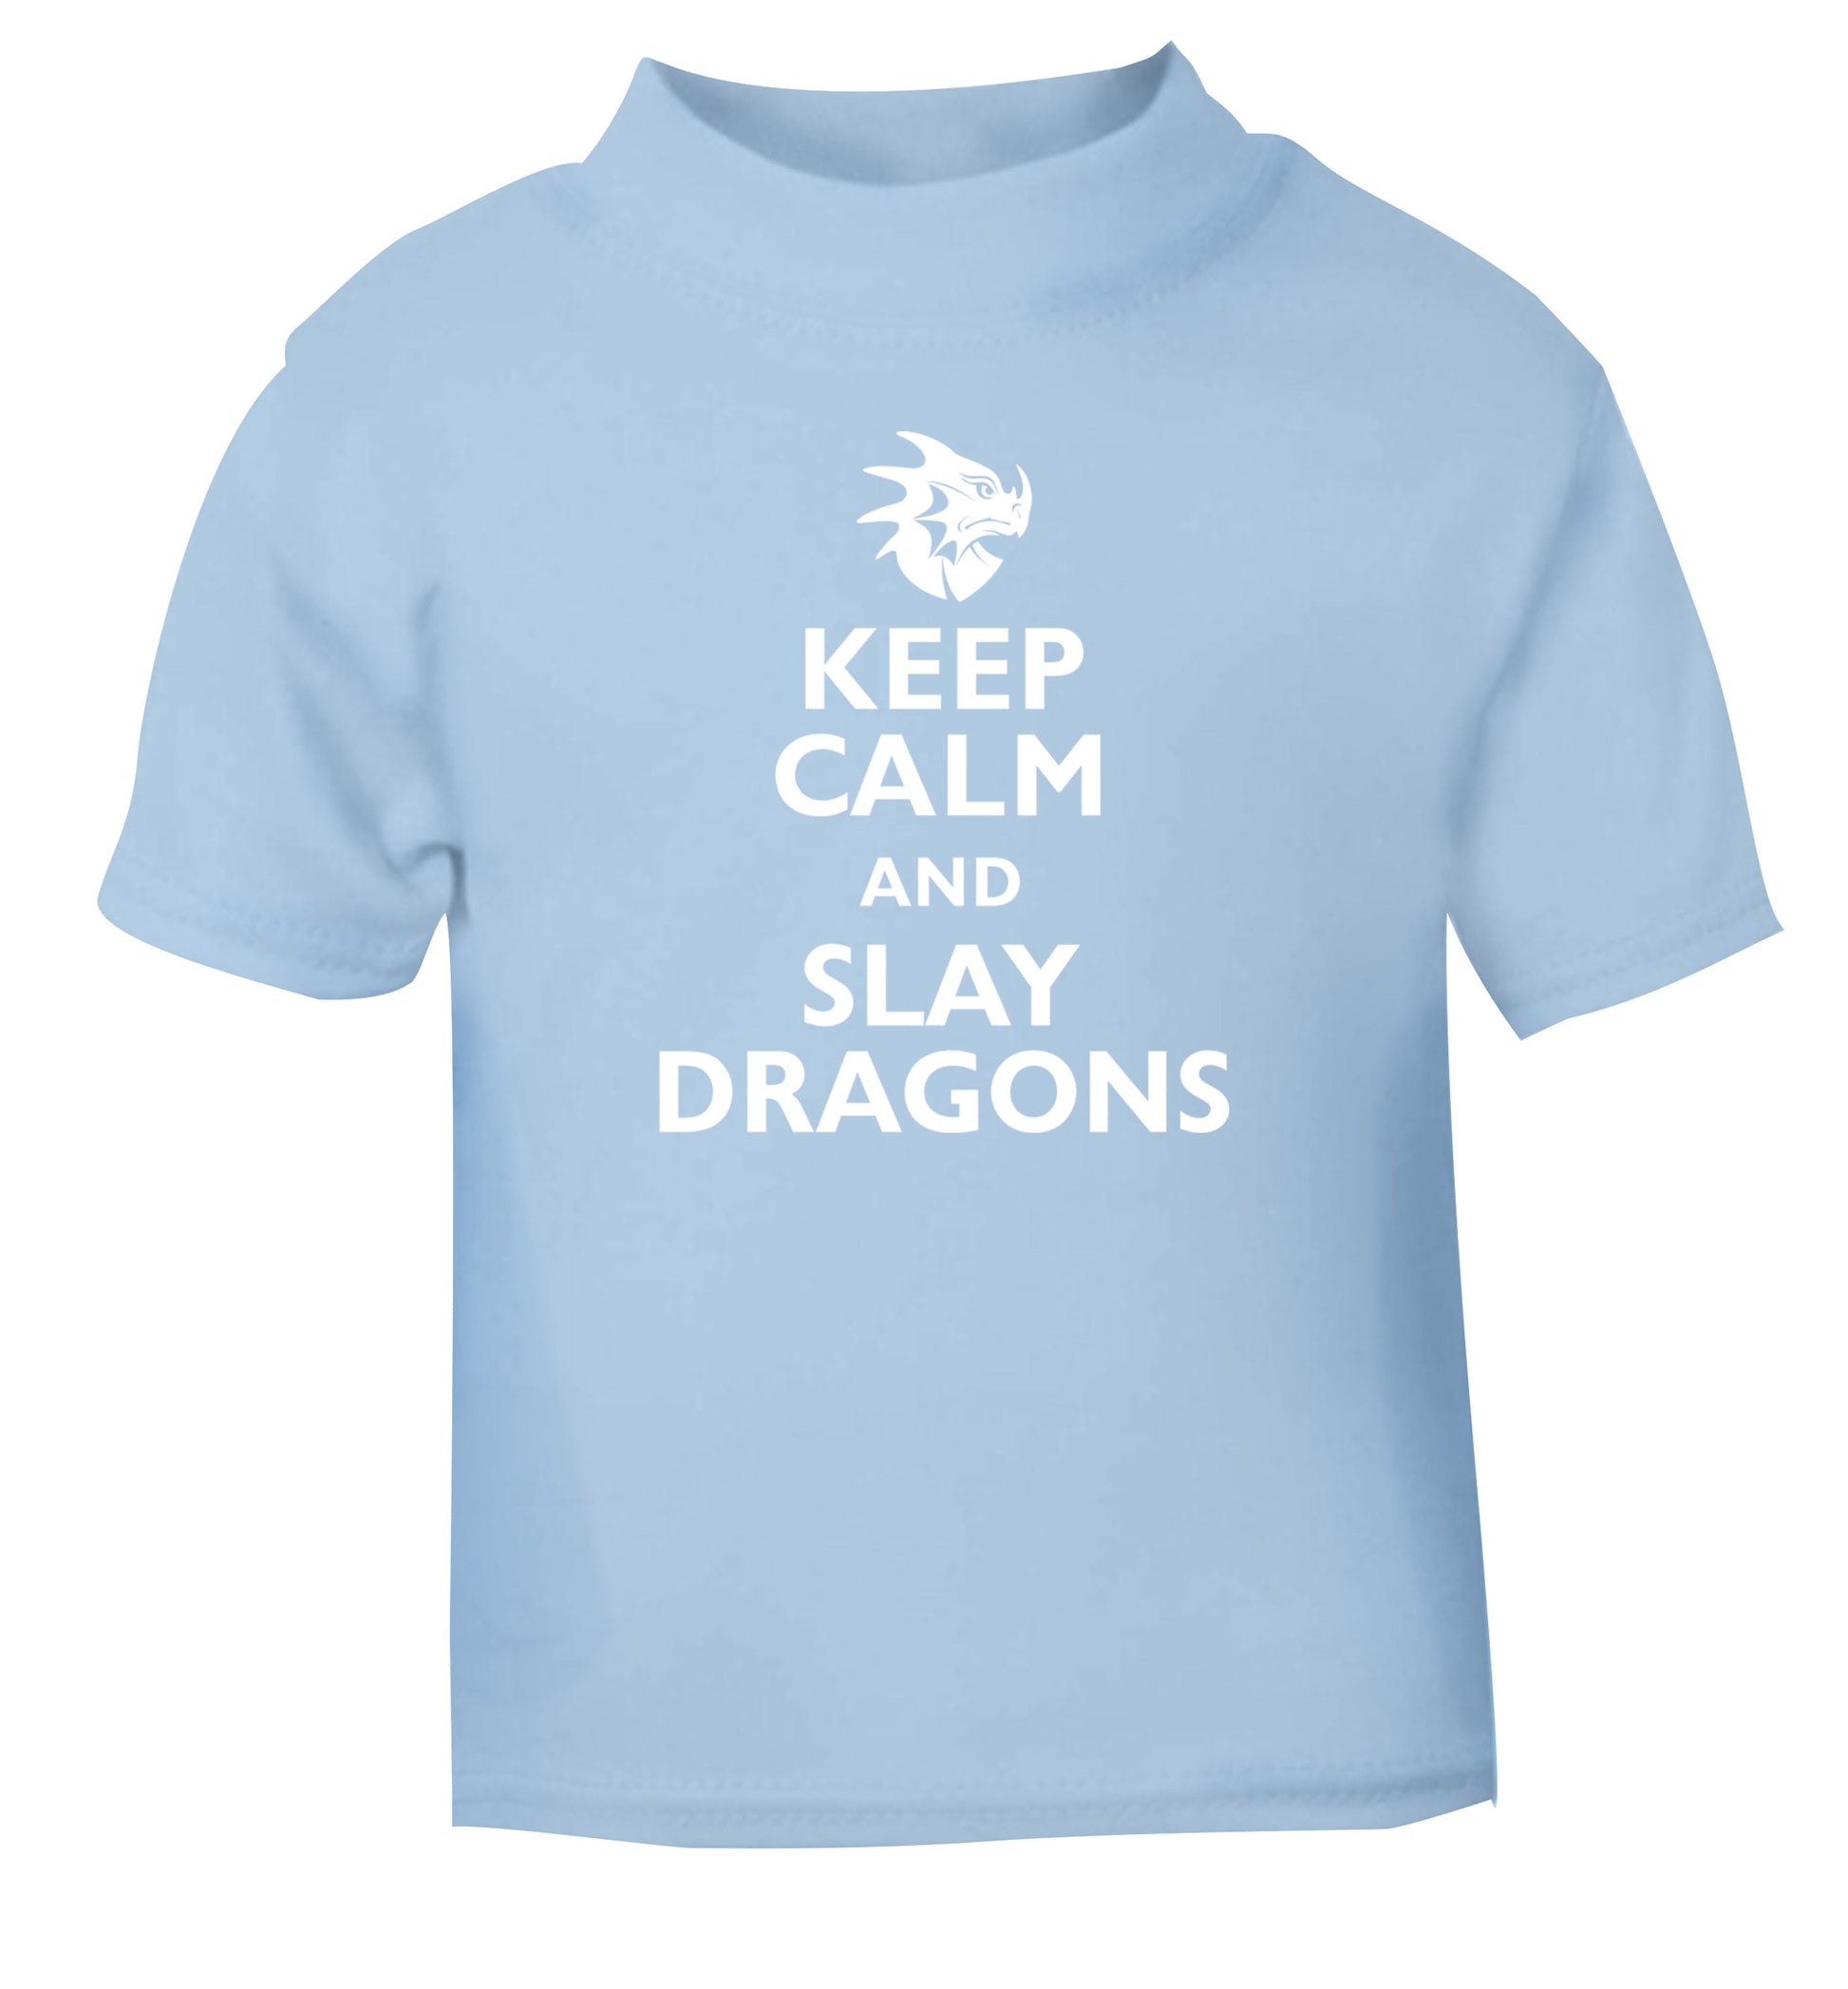 Keep calm and slay dragons light blue Baby Toddler Tshirt 2 Years